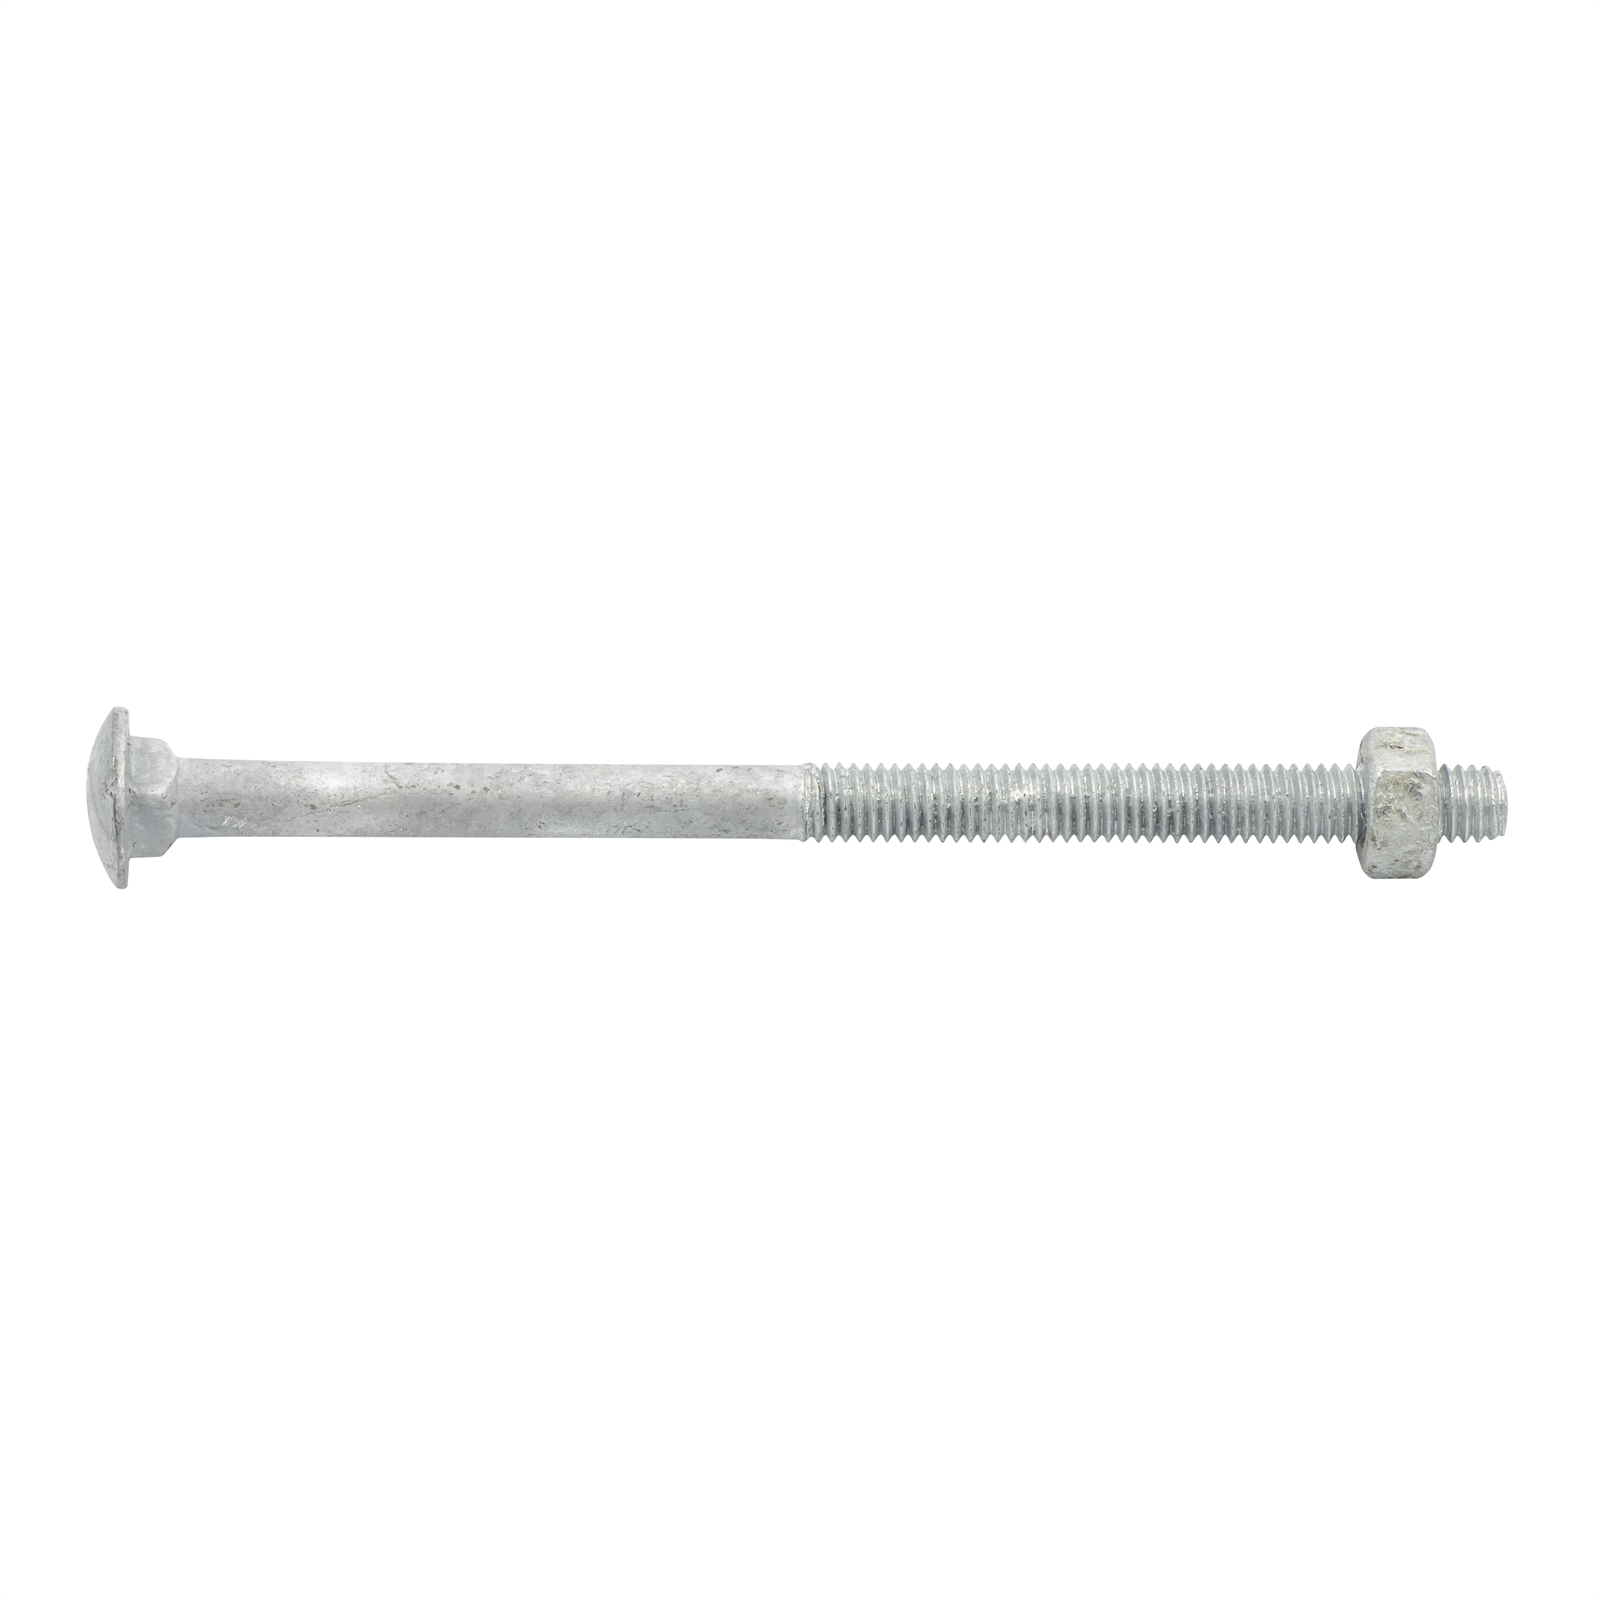 Zenith M6 x 100mm Galvanised Cup Head Bolt and Nut